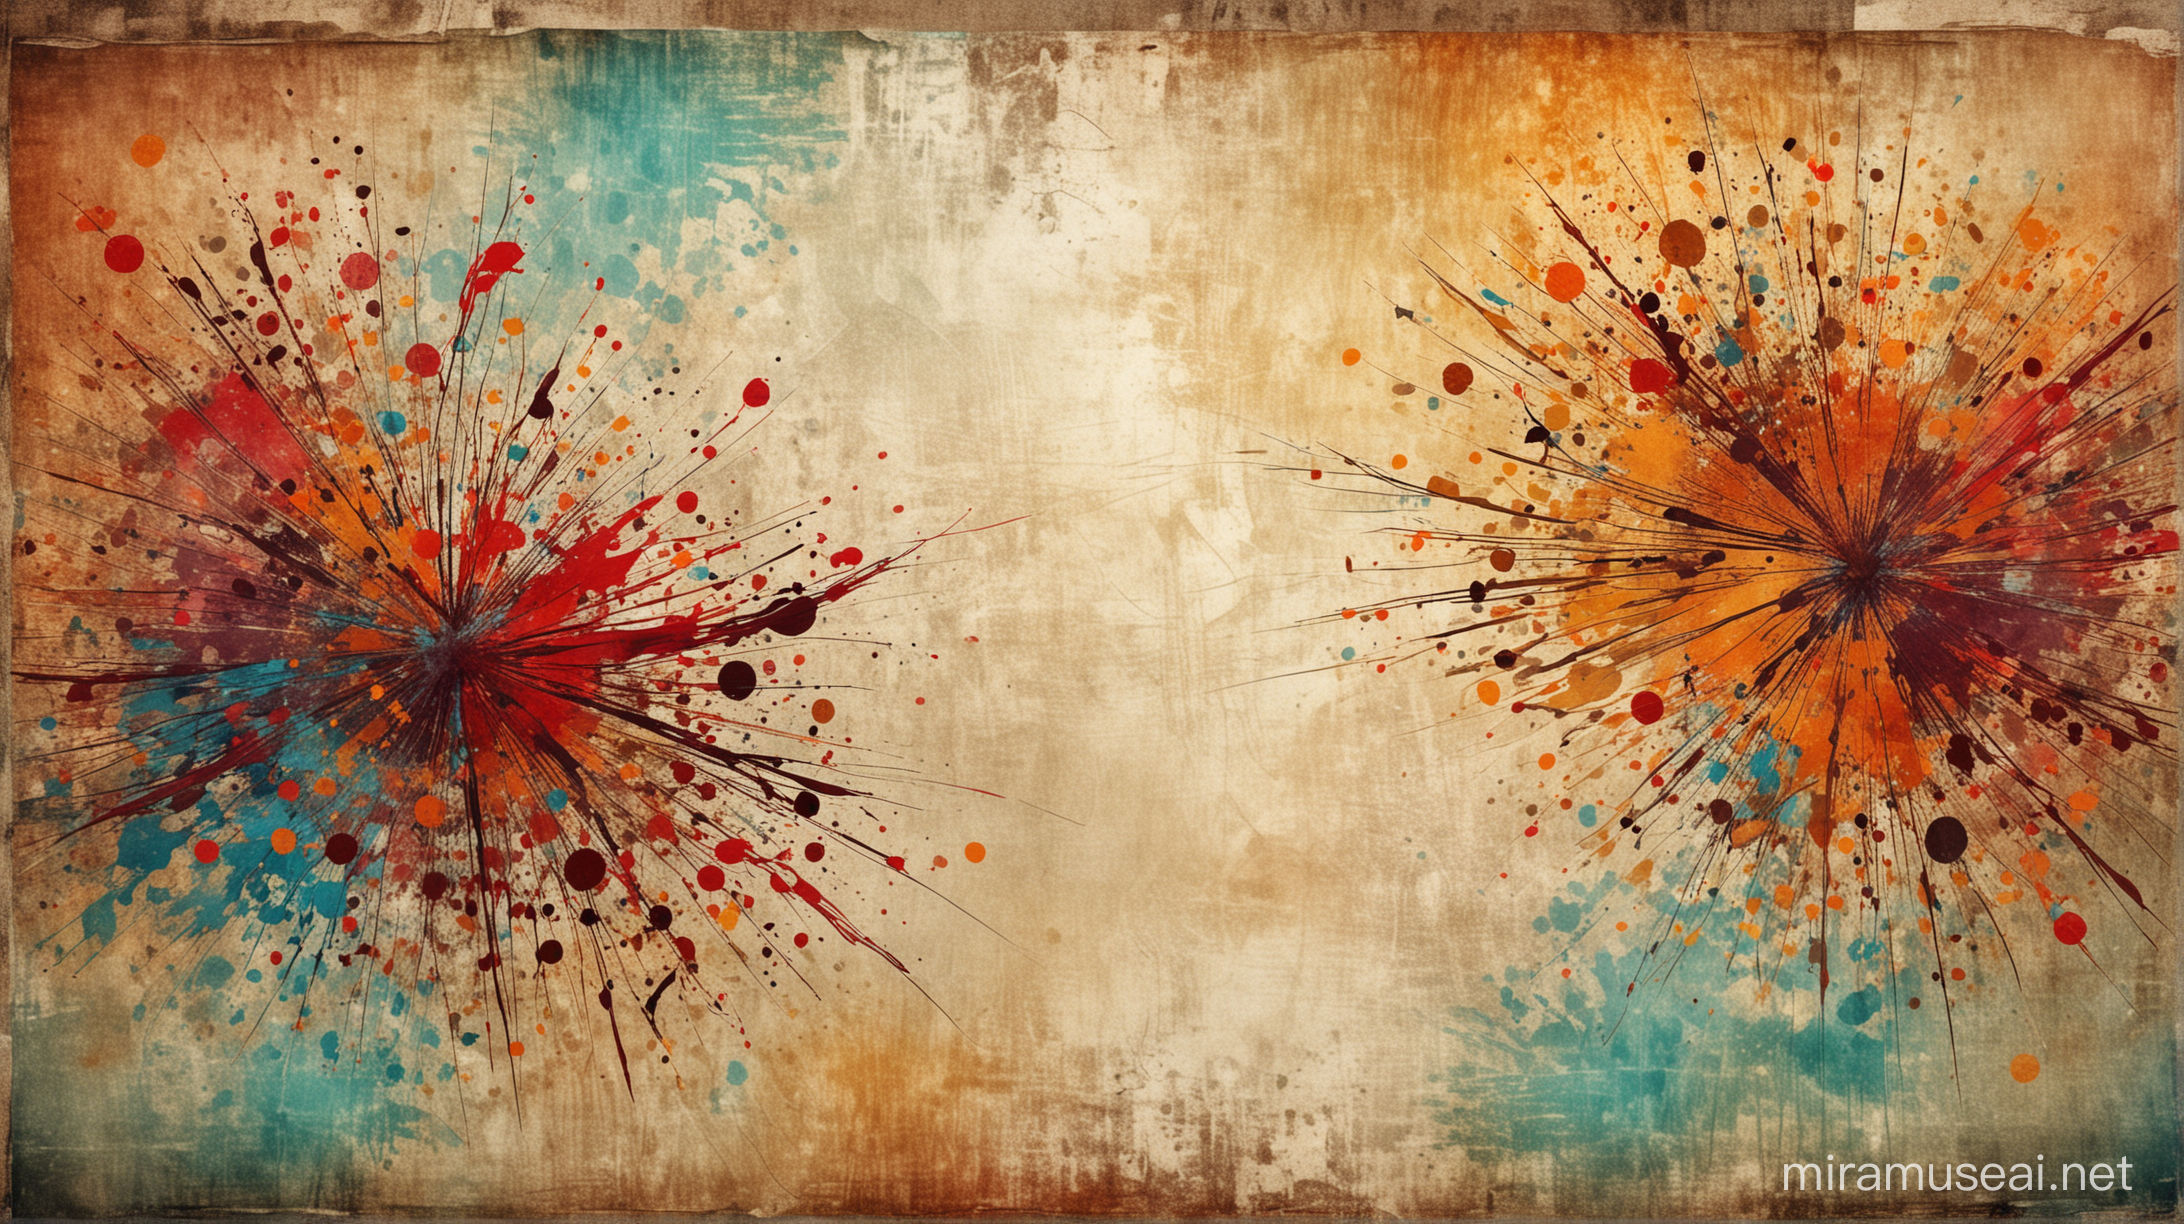 Vibrant Abstract Art Intricate Textures and Background